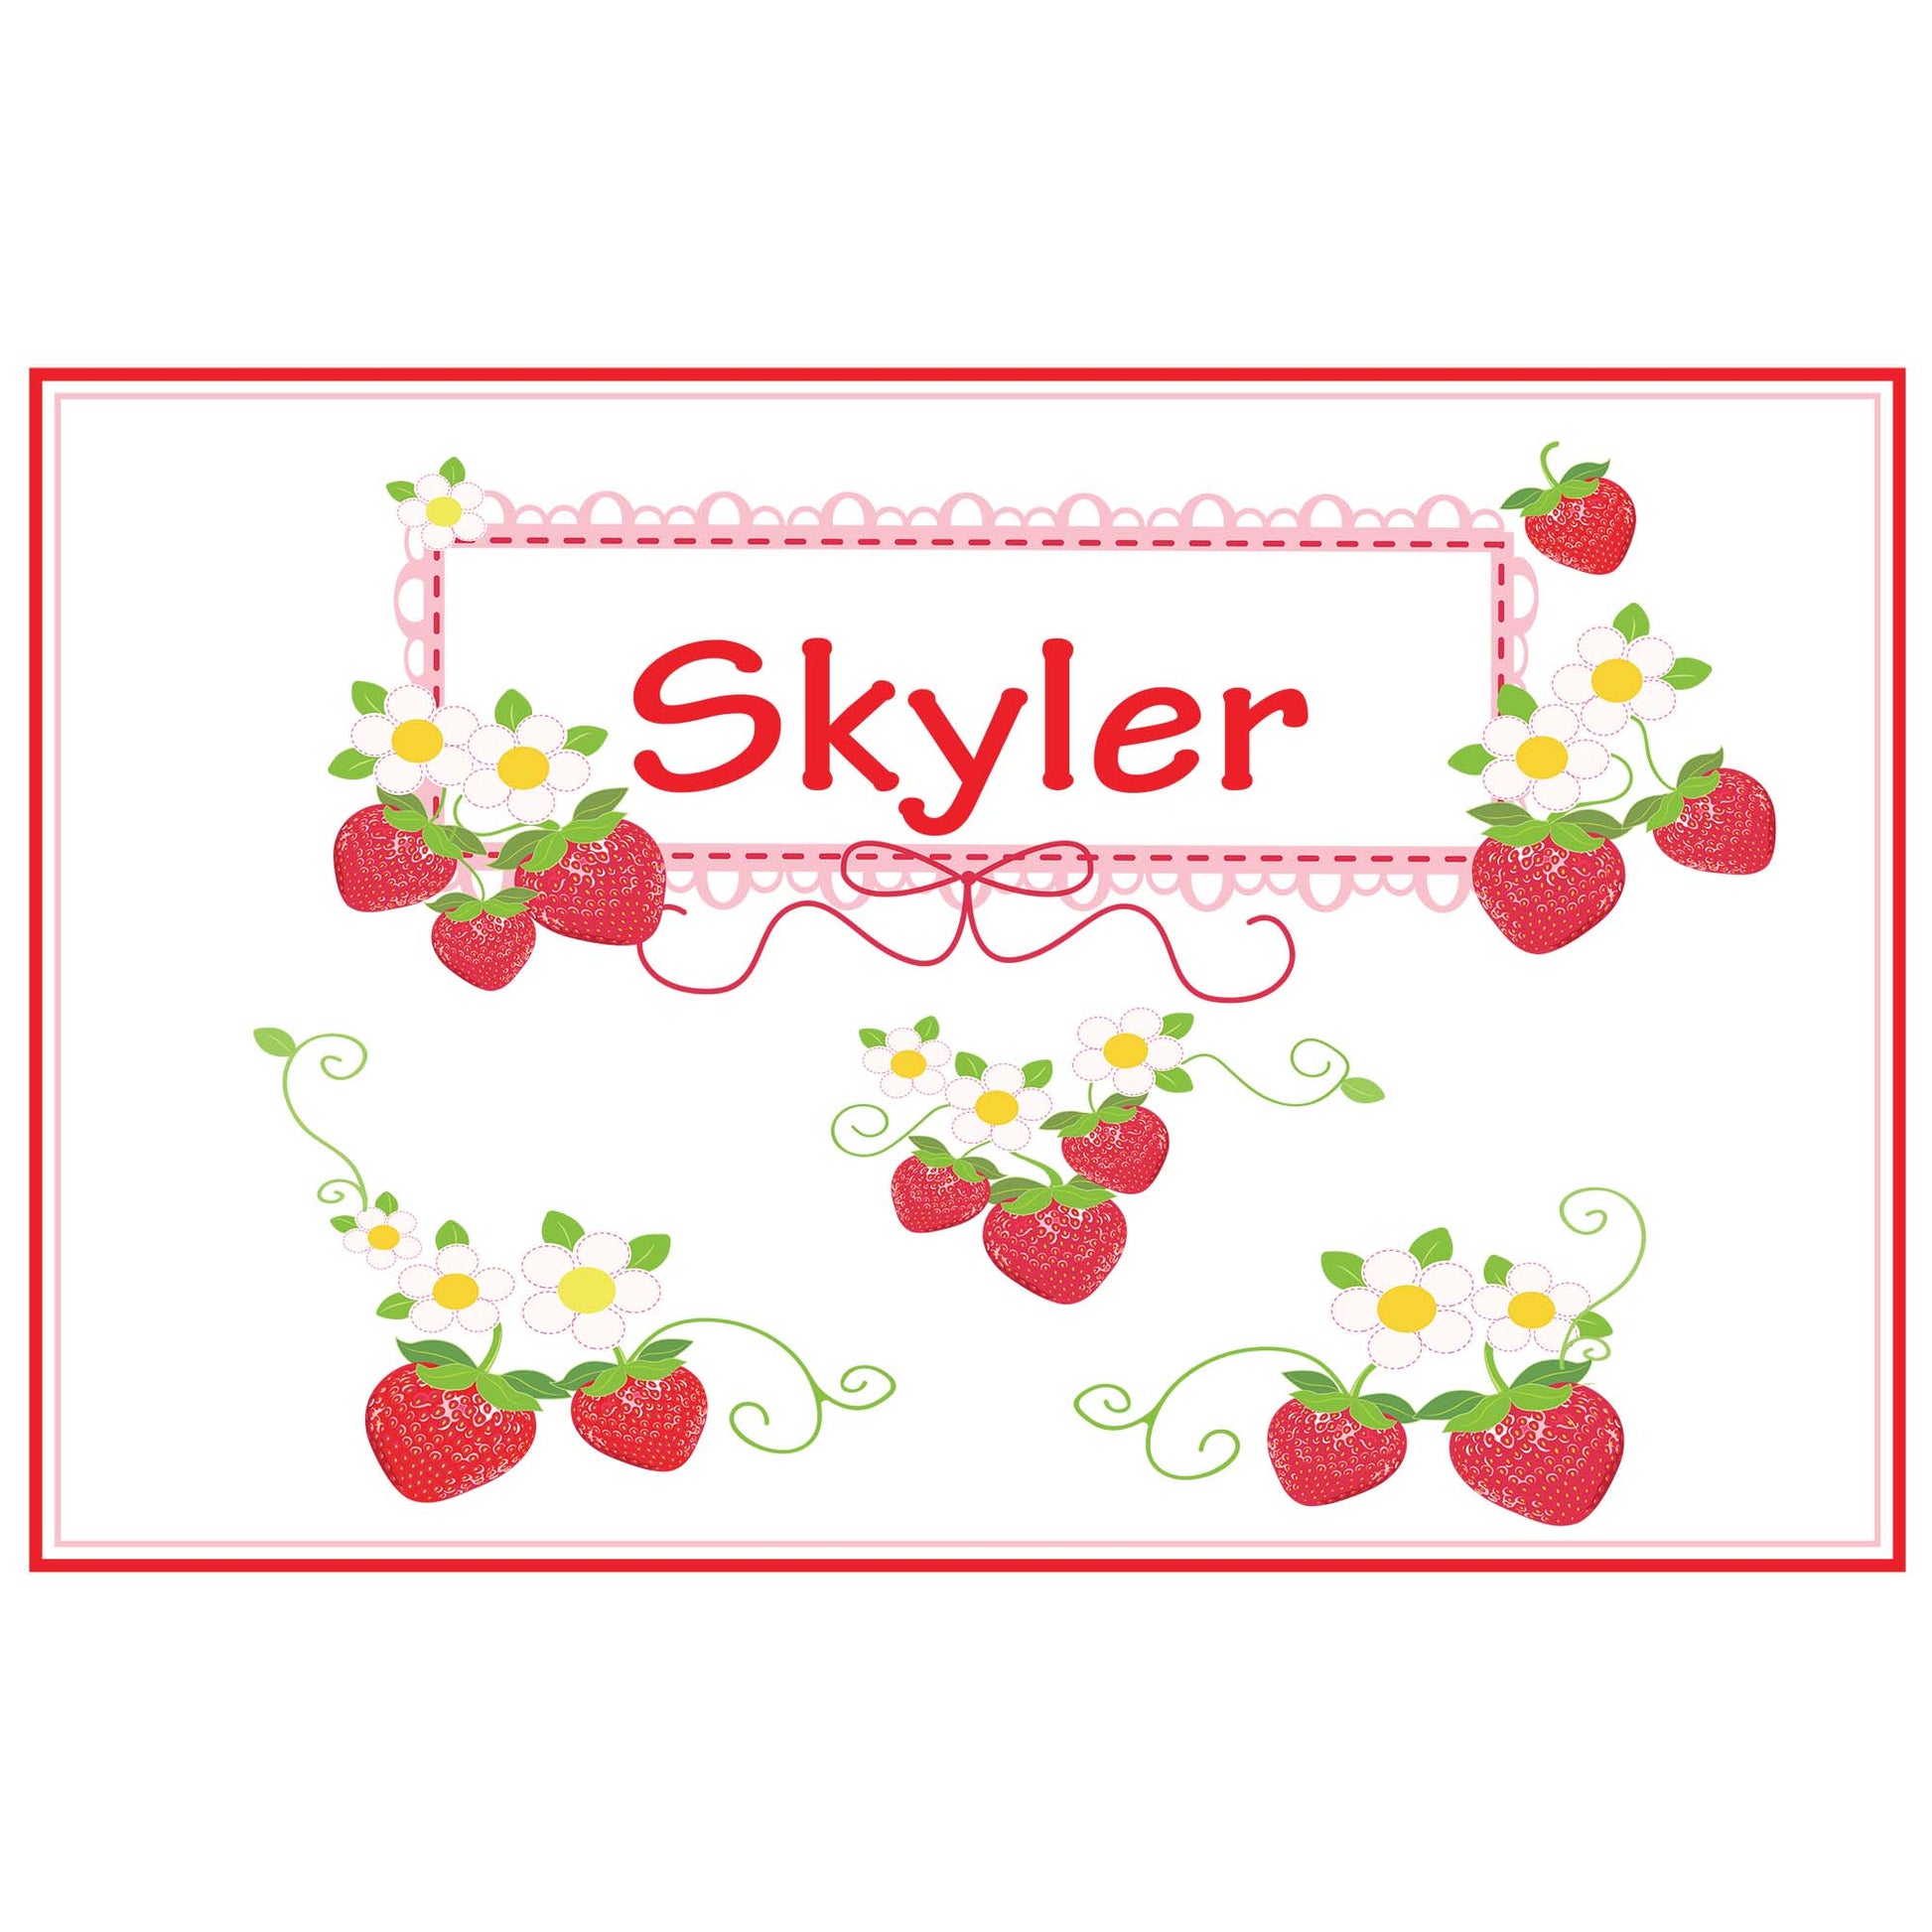 Personalized Placemat with Strawberries design